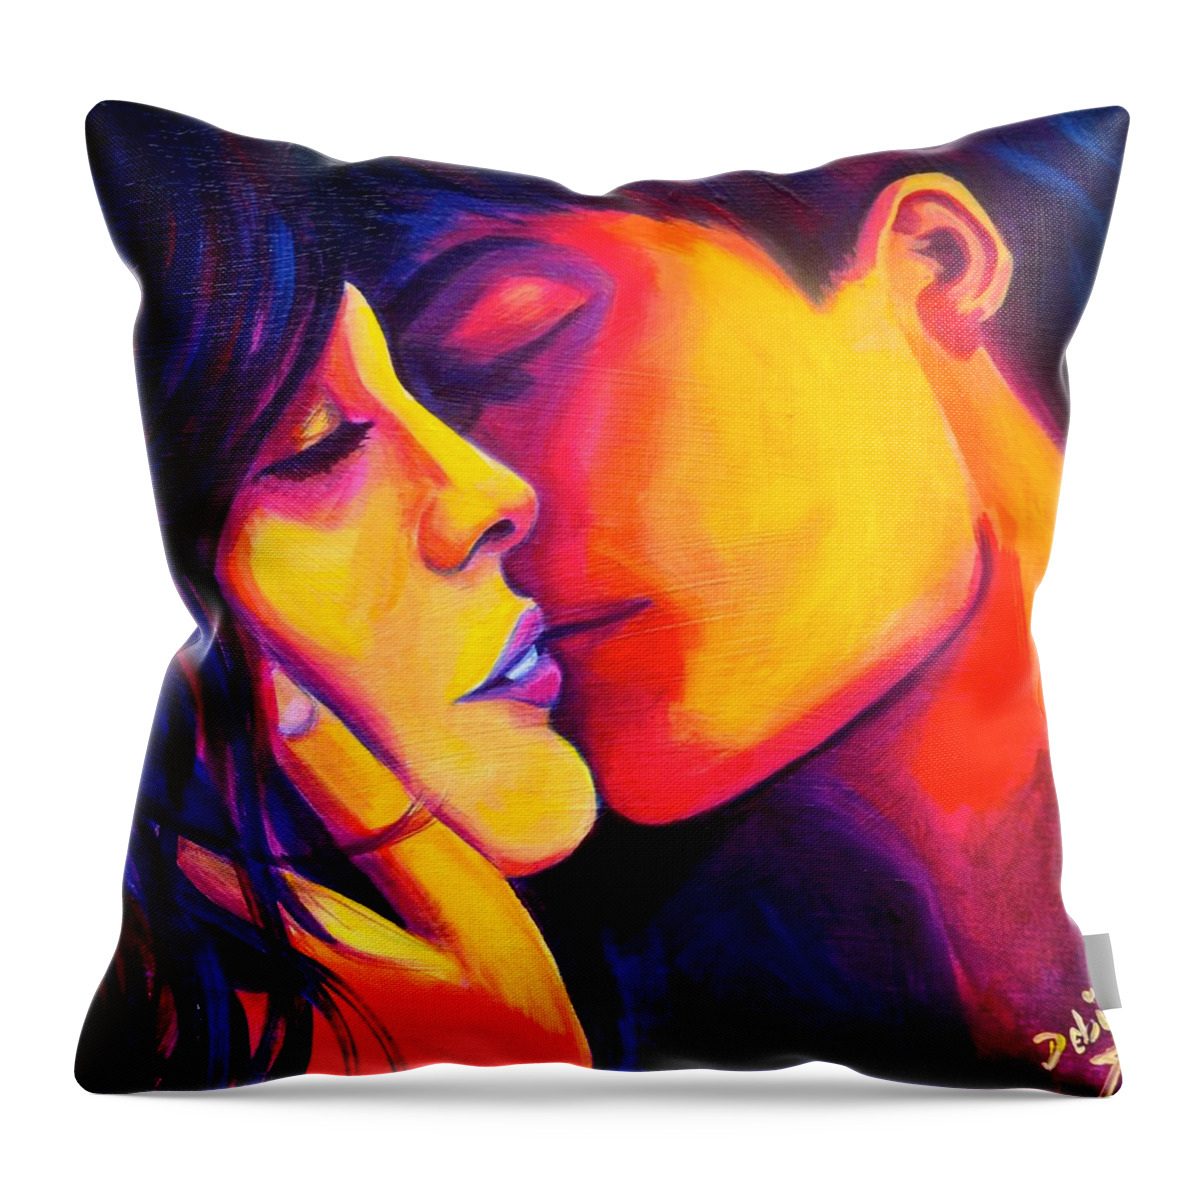 Desire Throw Pillow featuring the painting Desire by Debi Starr